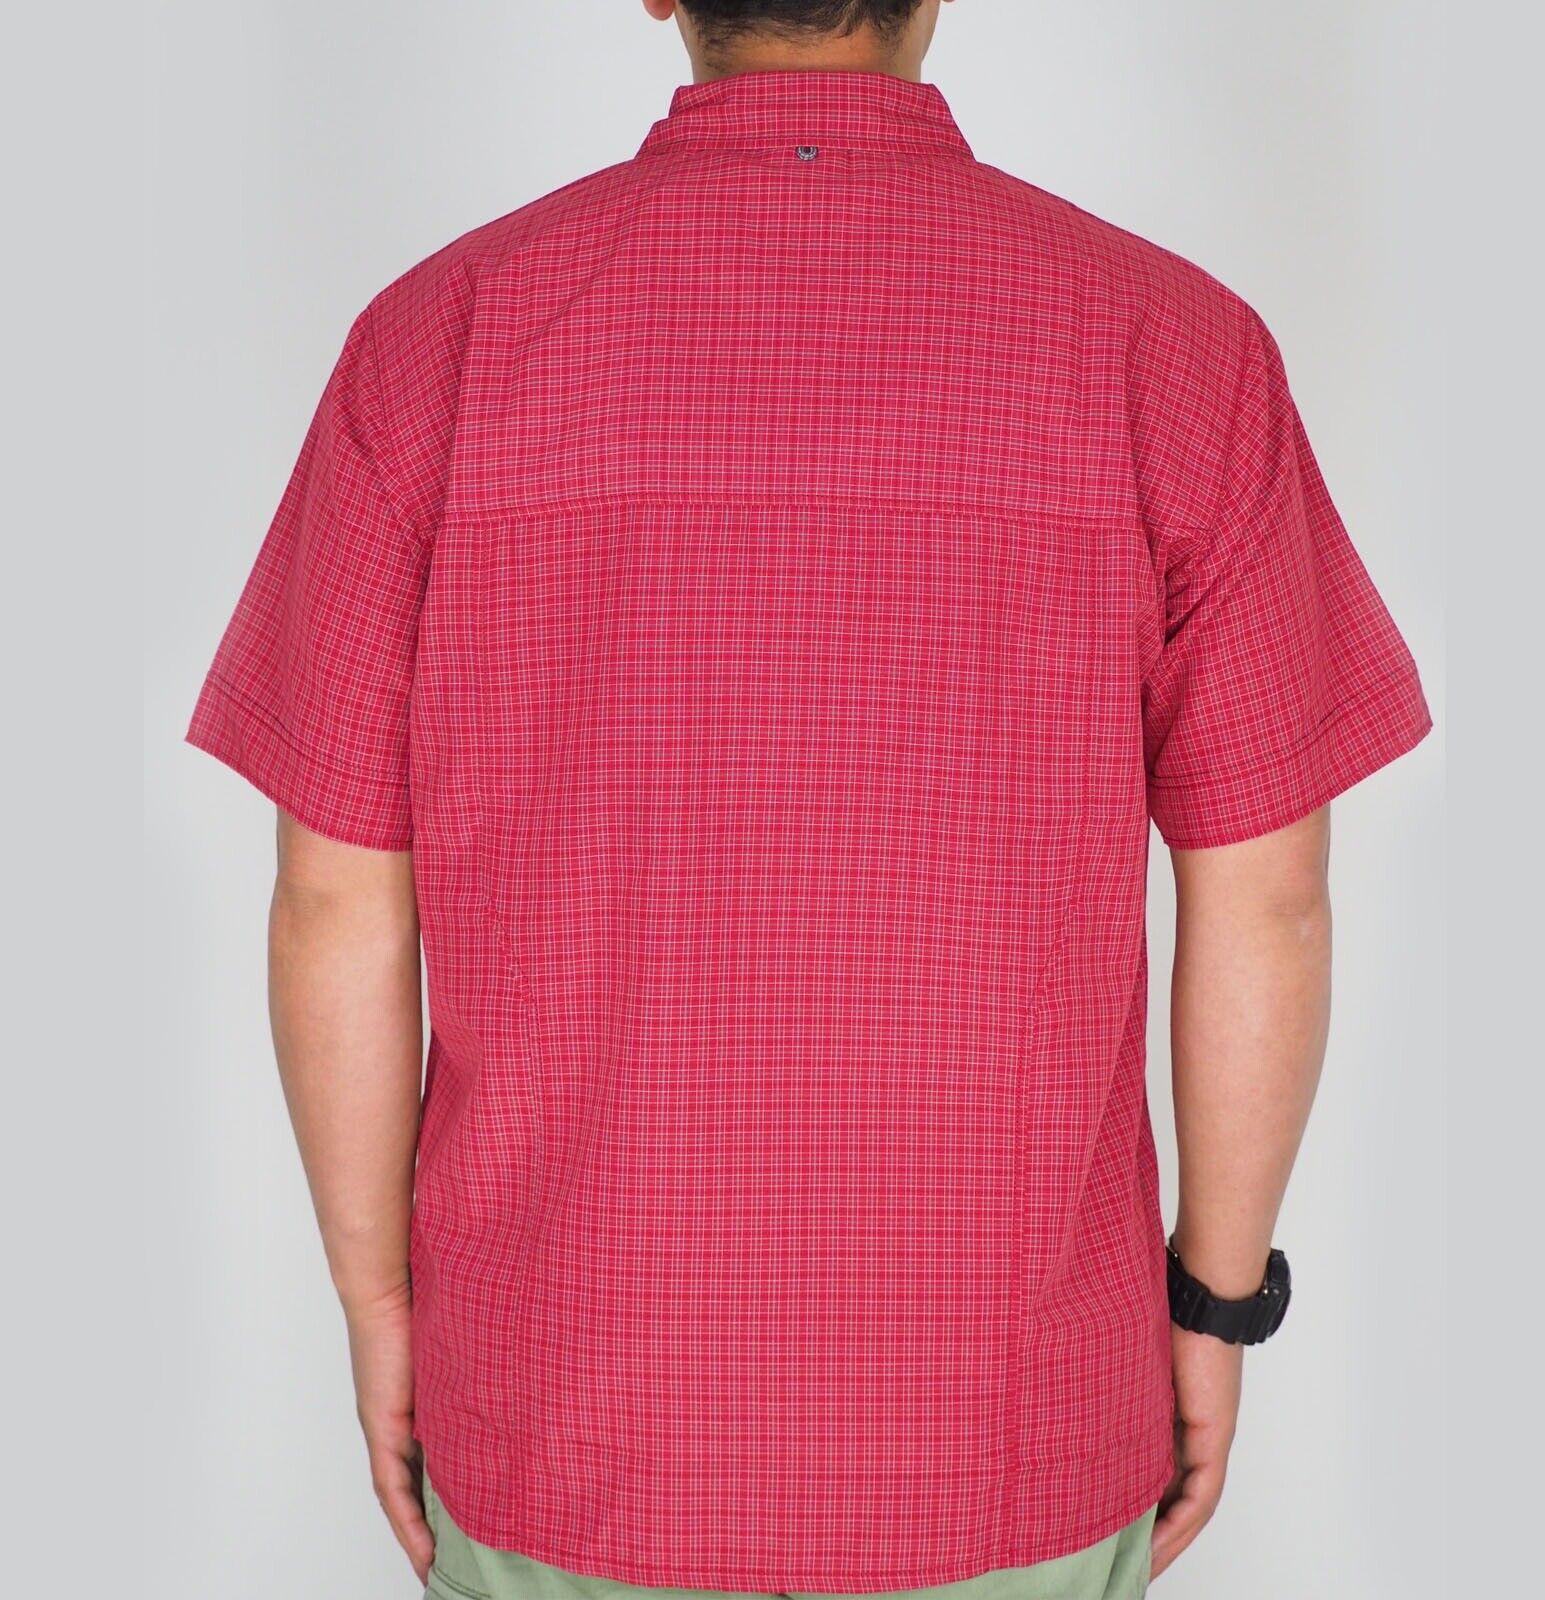 Mens Jack Wolfskin 5009321 Indian Red Checks Short Sleeved Shirt - London Top Style